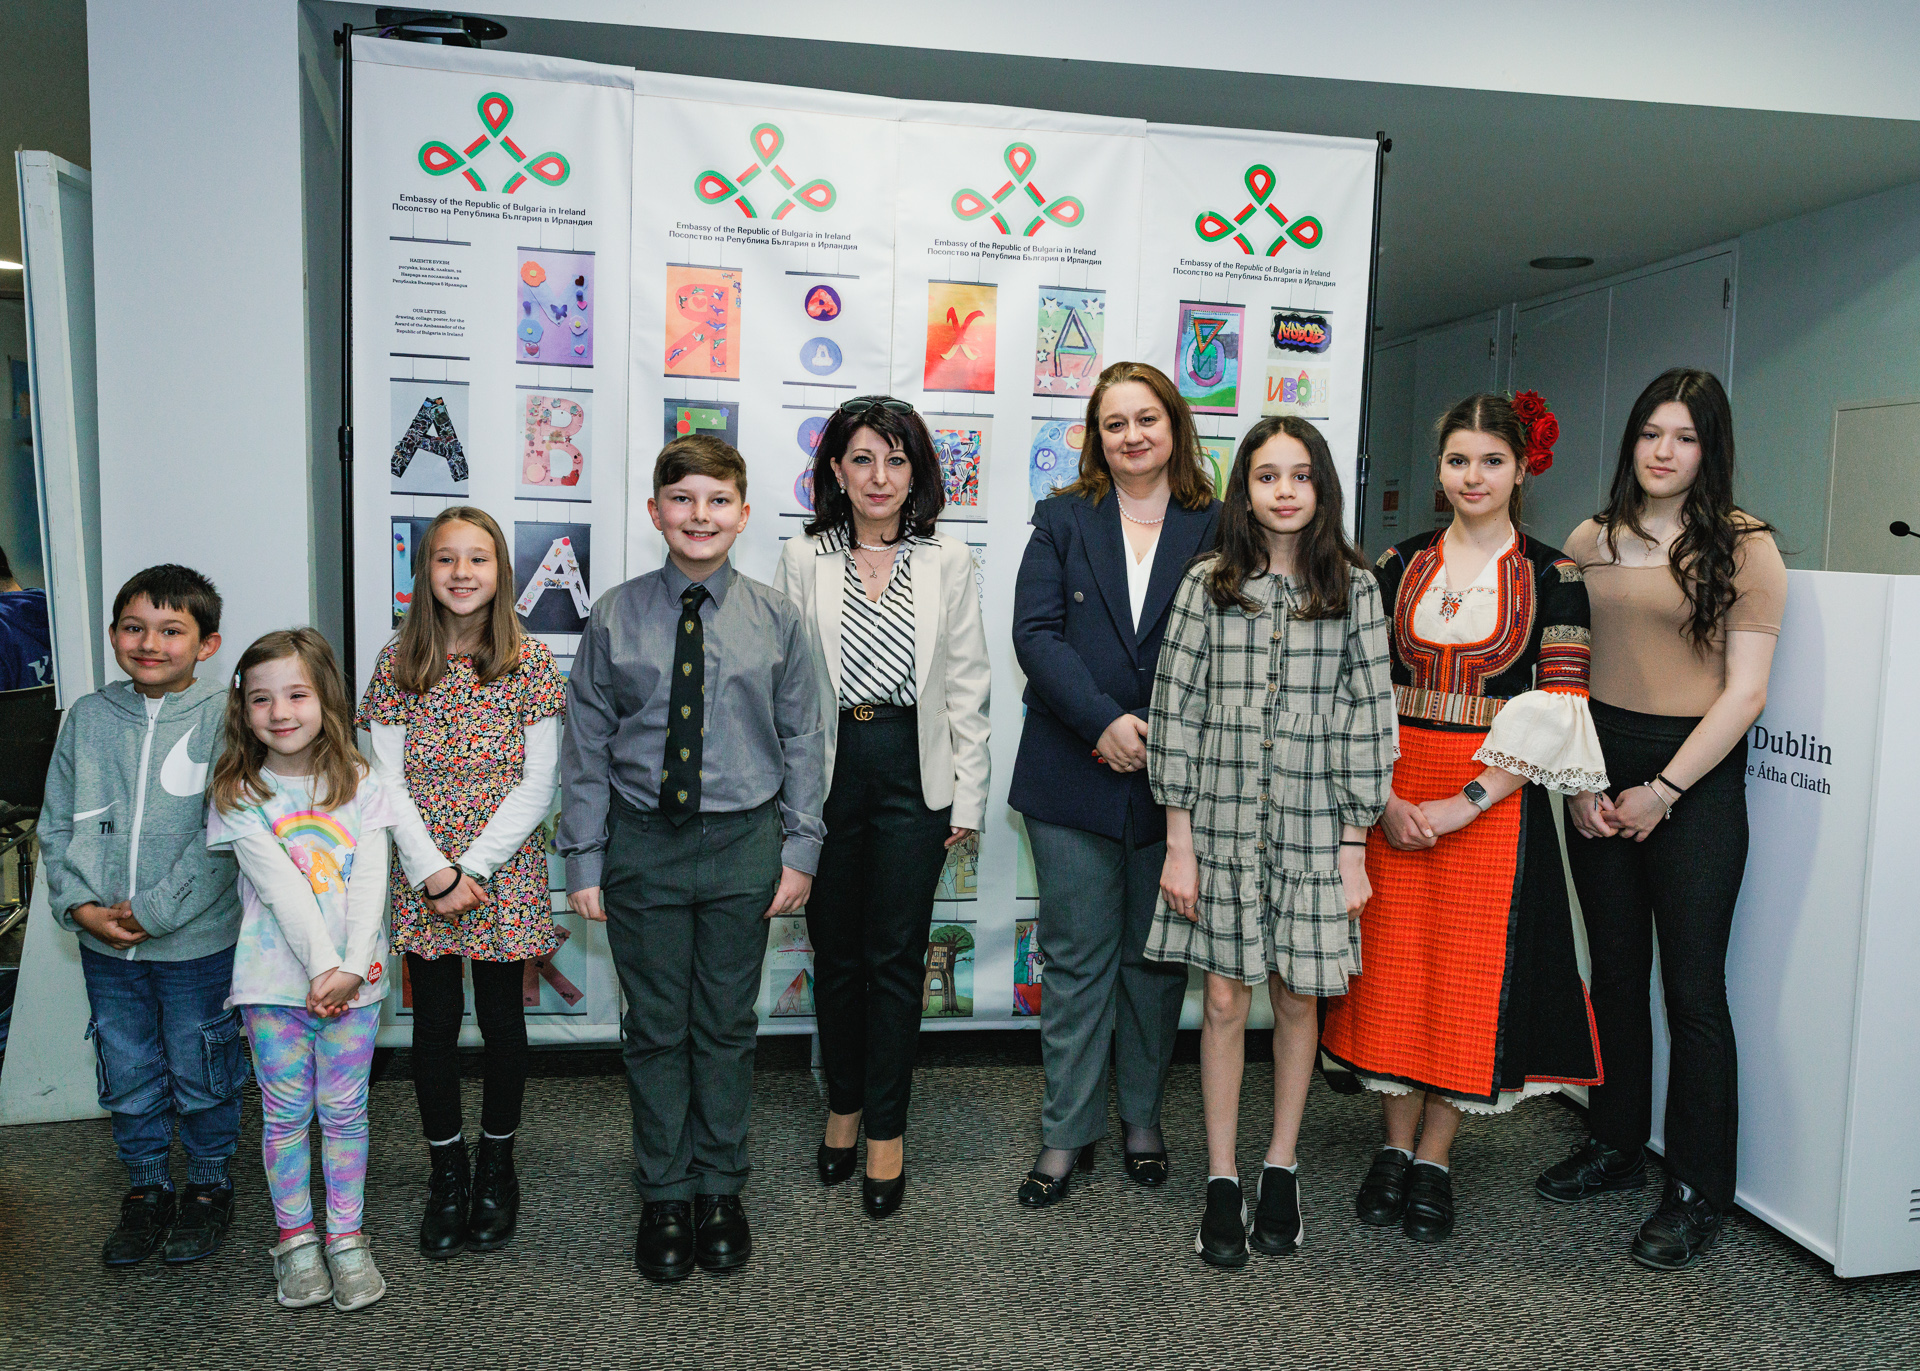 The Embassy of Bulgaria to Ireland was delighted with the opportunity to mark 24th of May